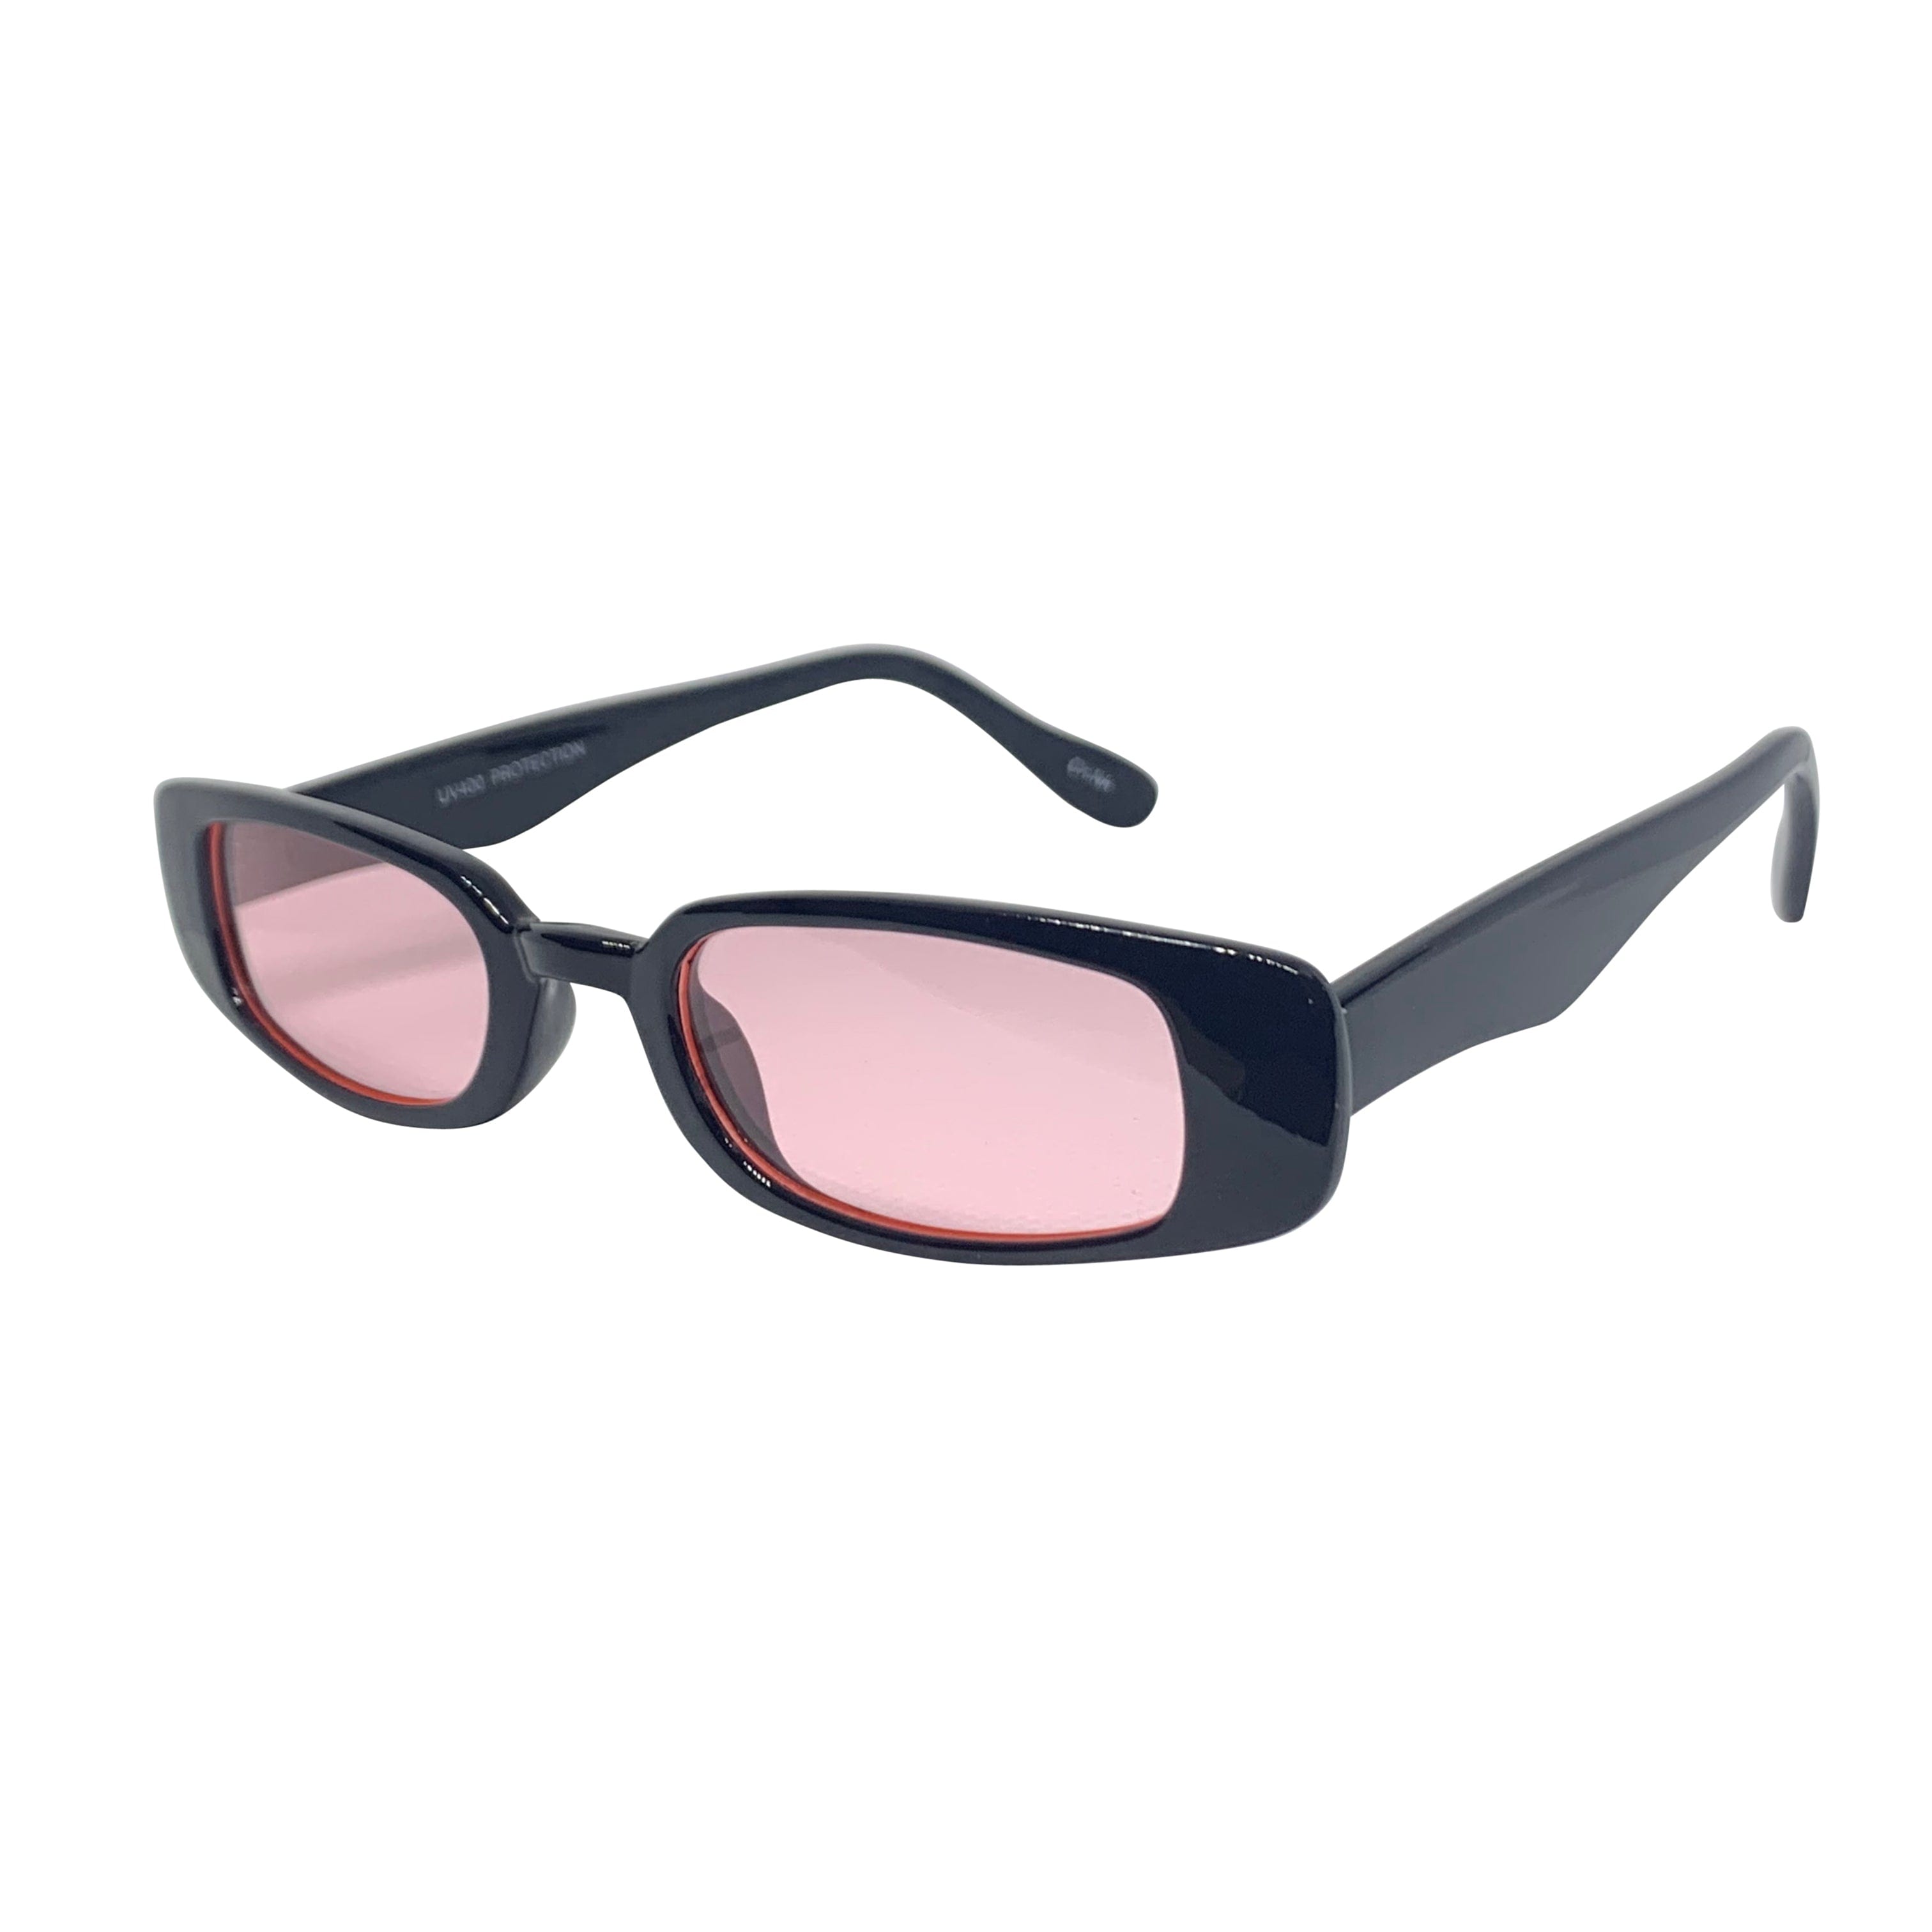 SKWAT Black and Baby Pink 90s Style Sunnies